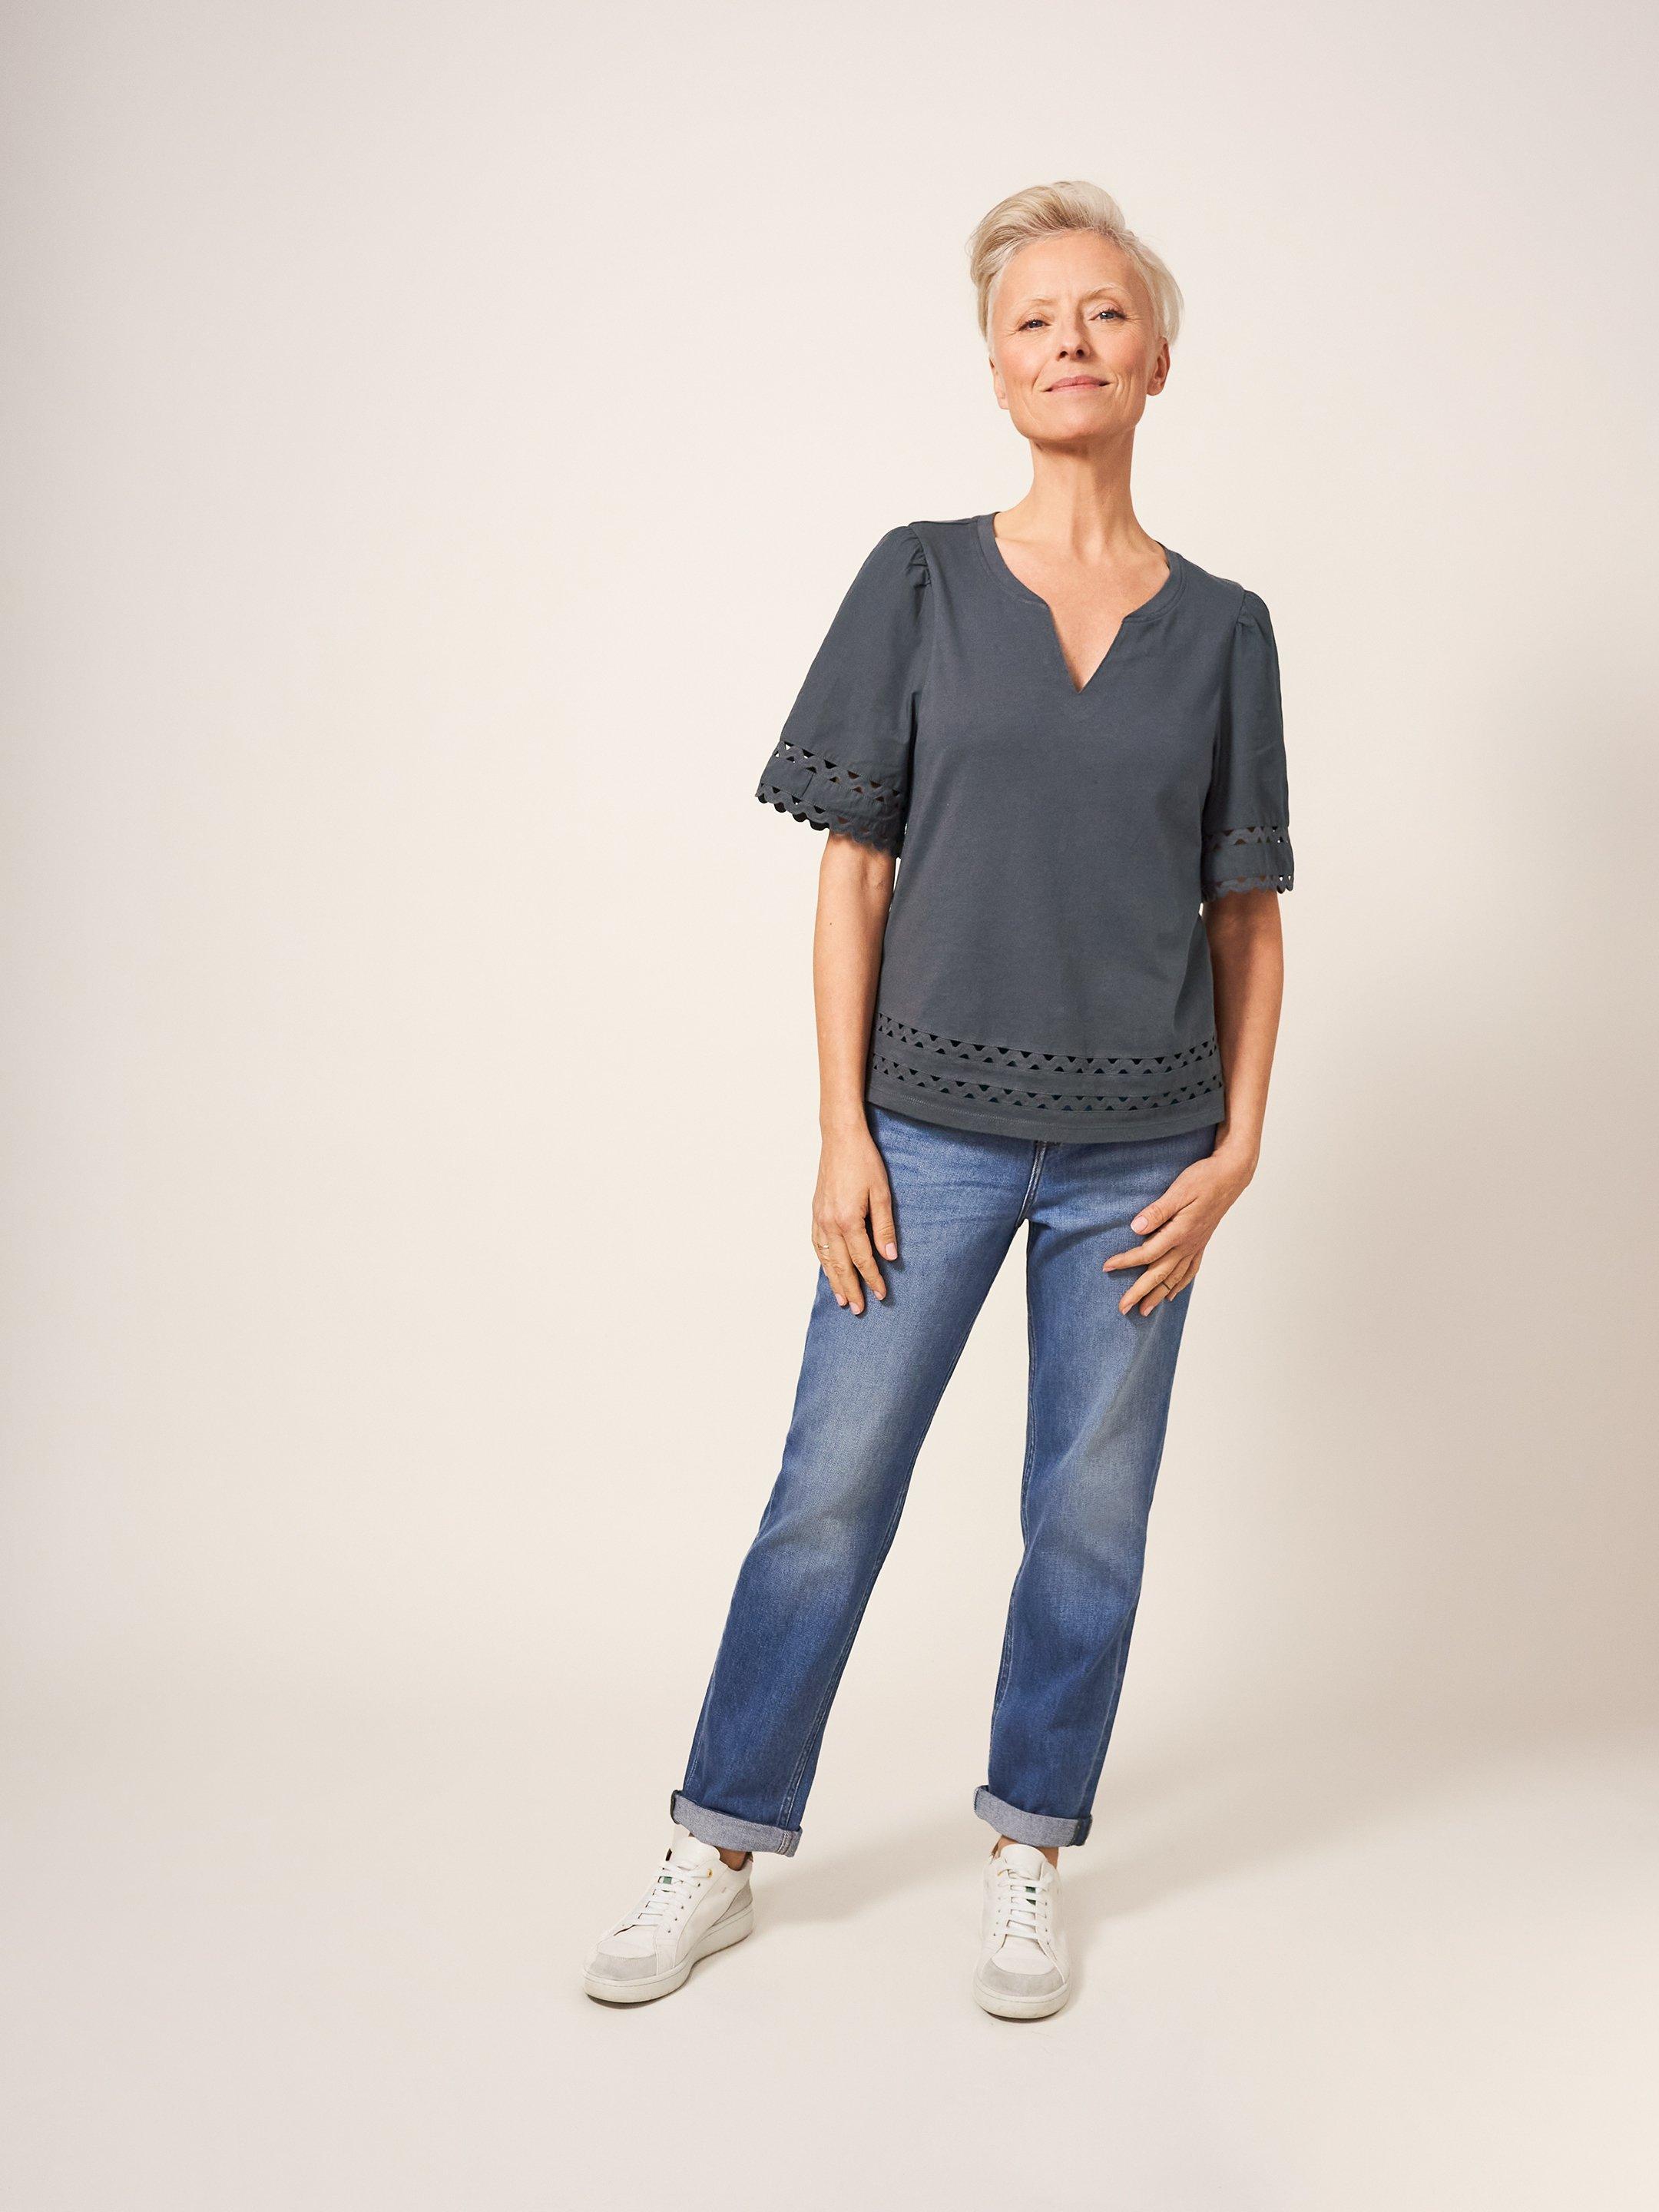 SAGE TRIM TOP in CHARC GREY - MODEL FRONT